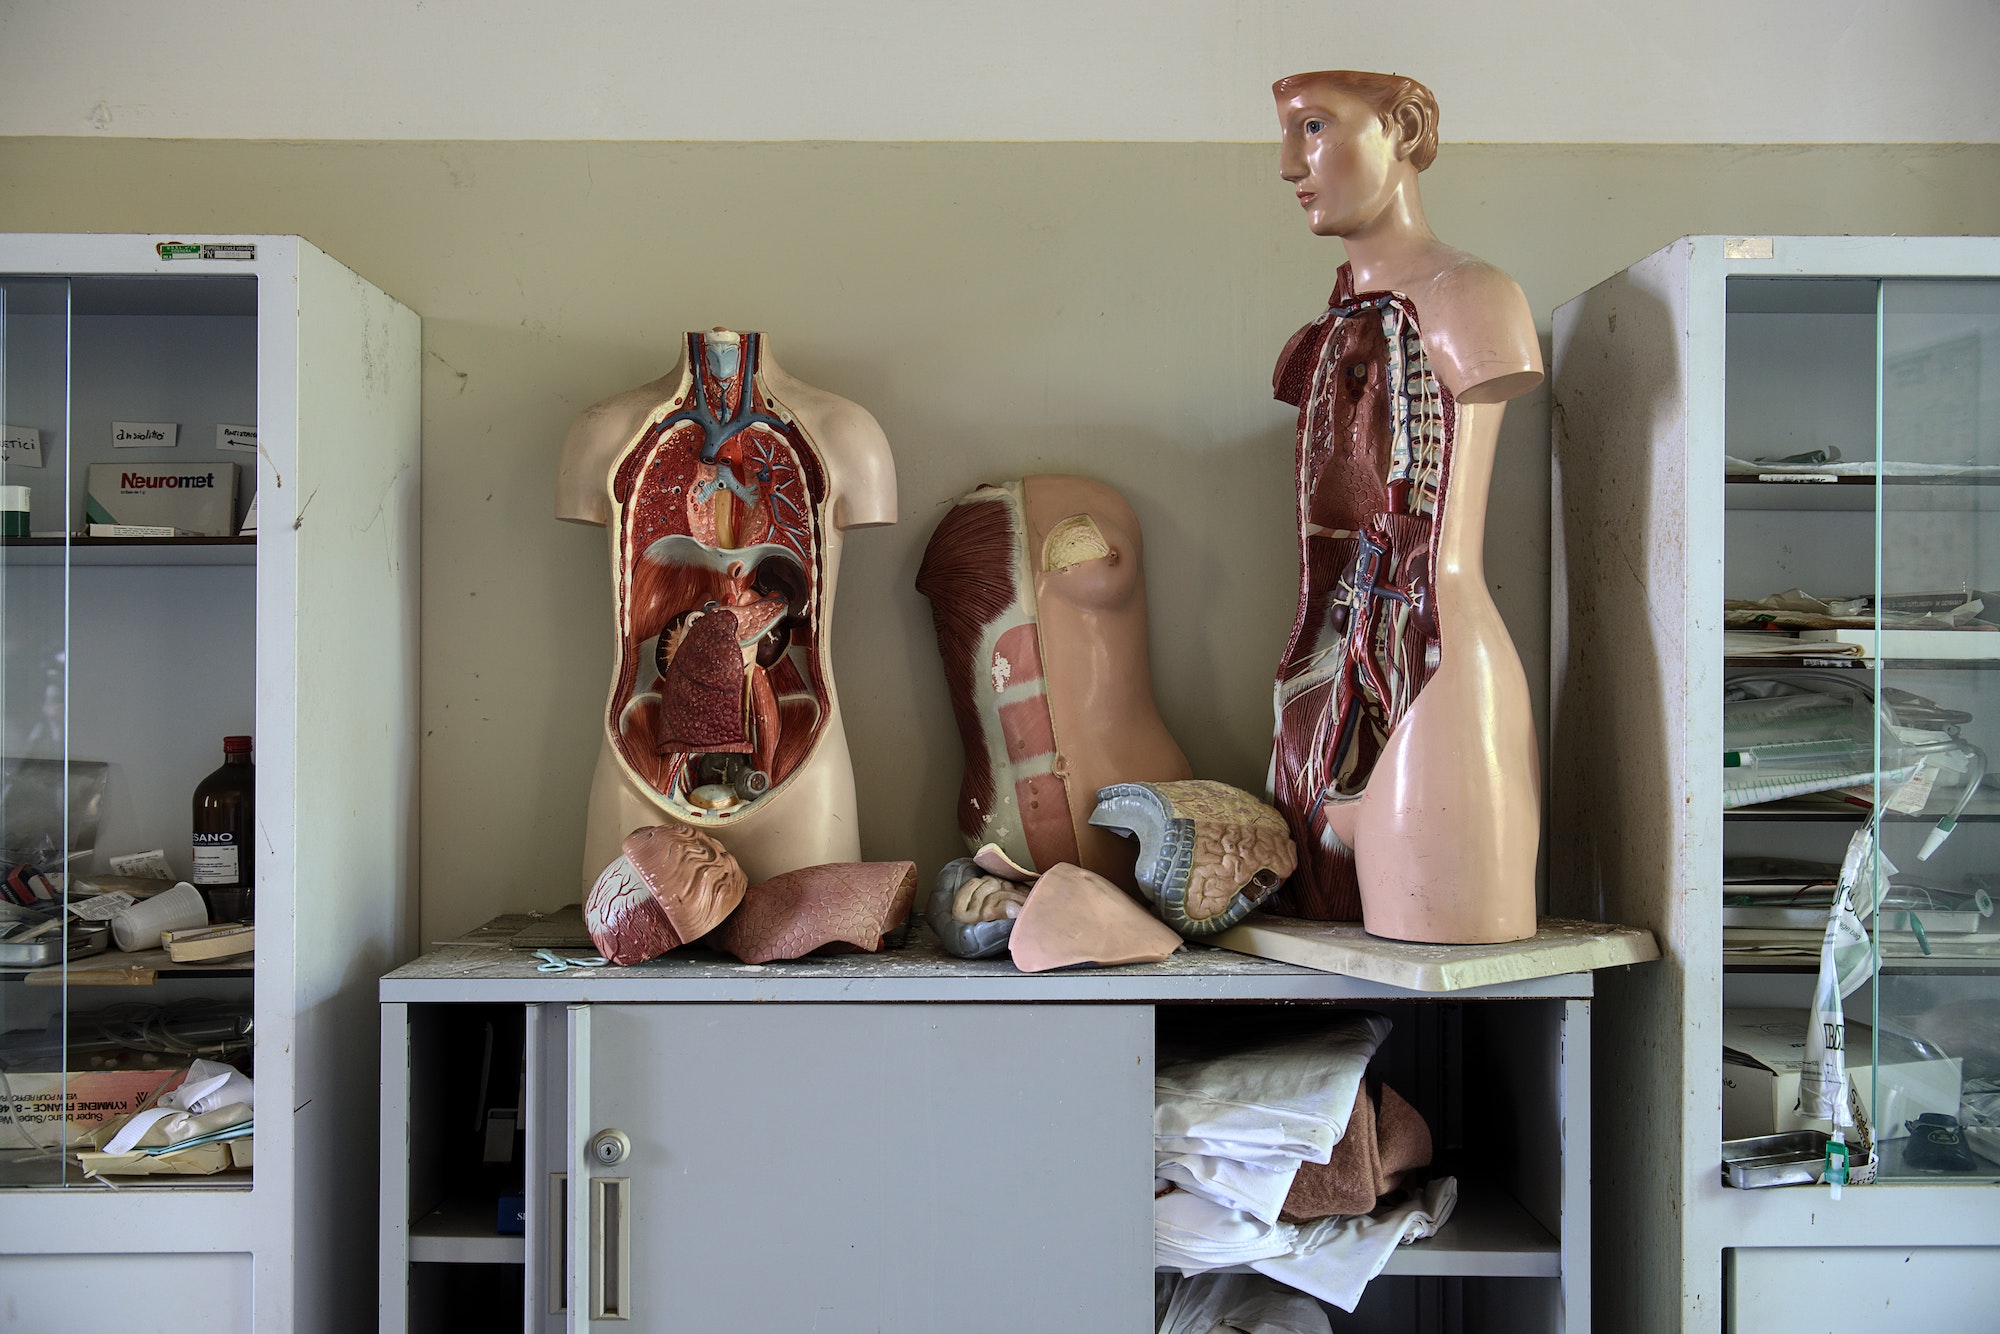 anatomical dummies showing the internal body processes